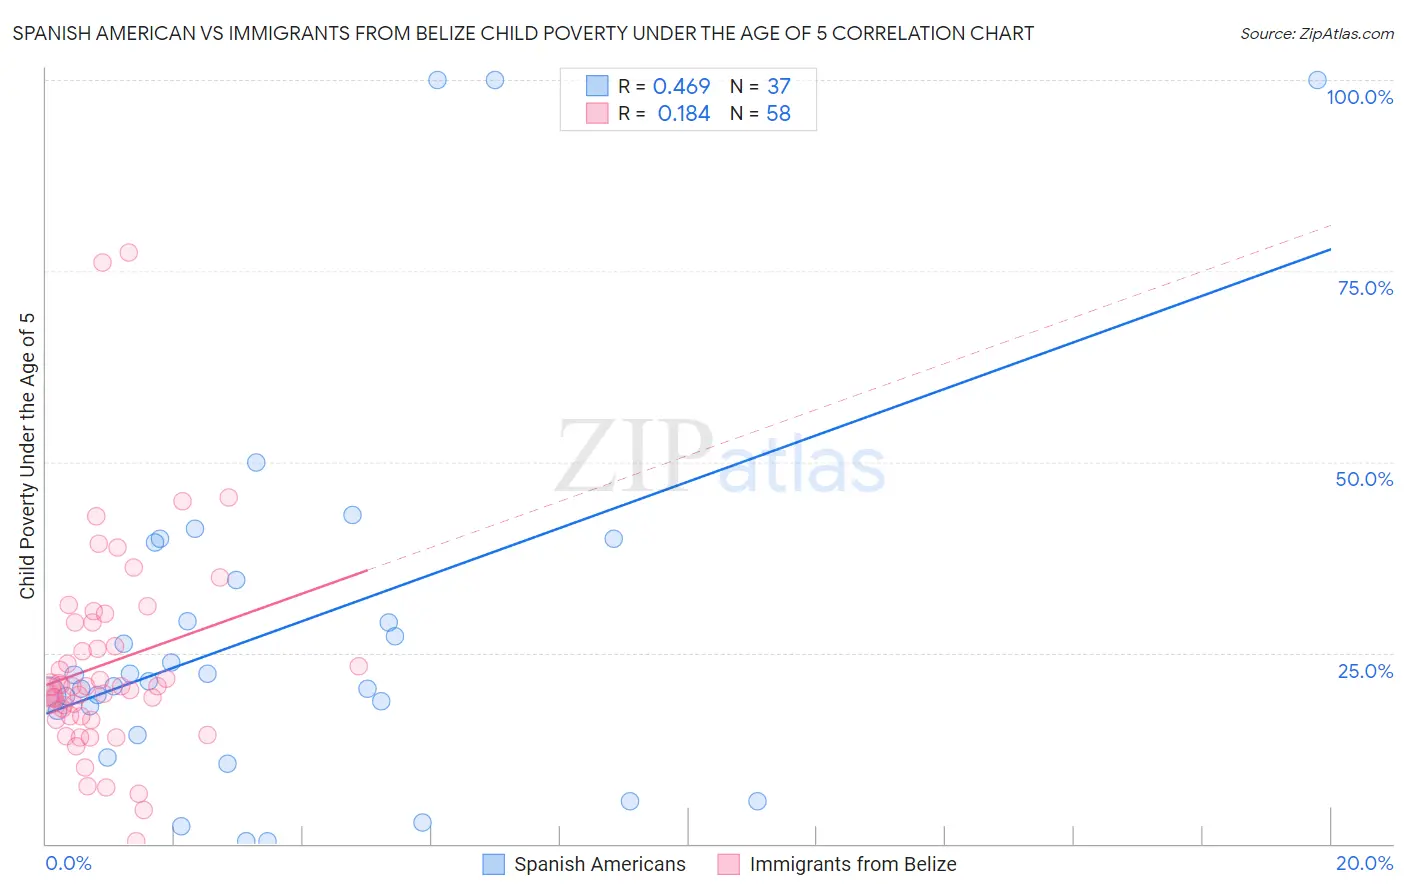 Spanish American vs Immigrants from Belize Child Poverty Under the Age of 5